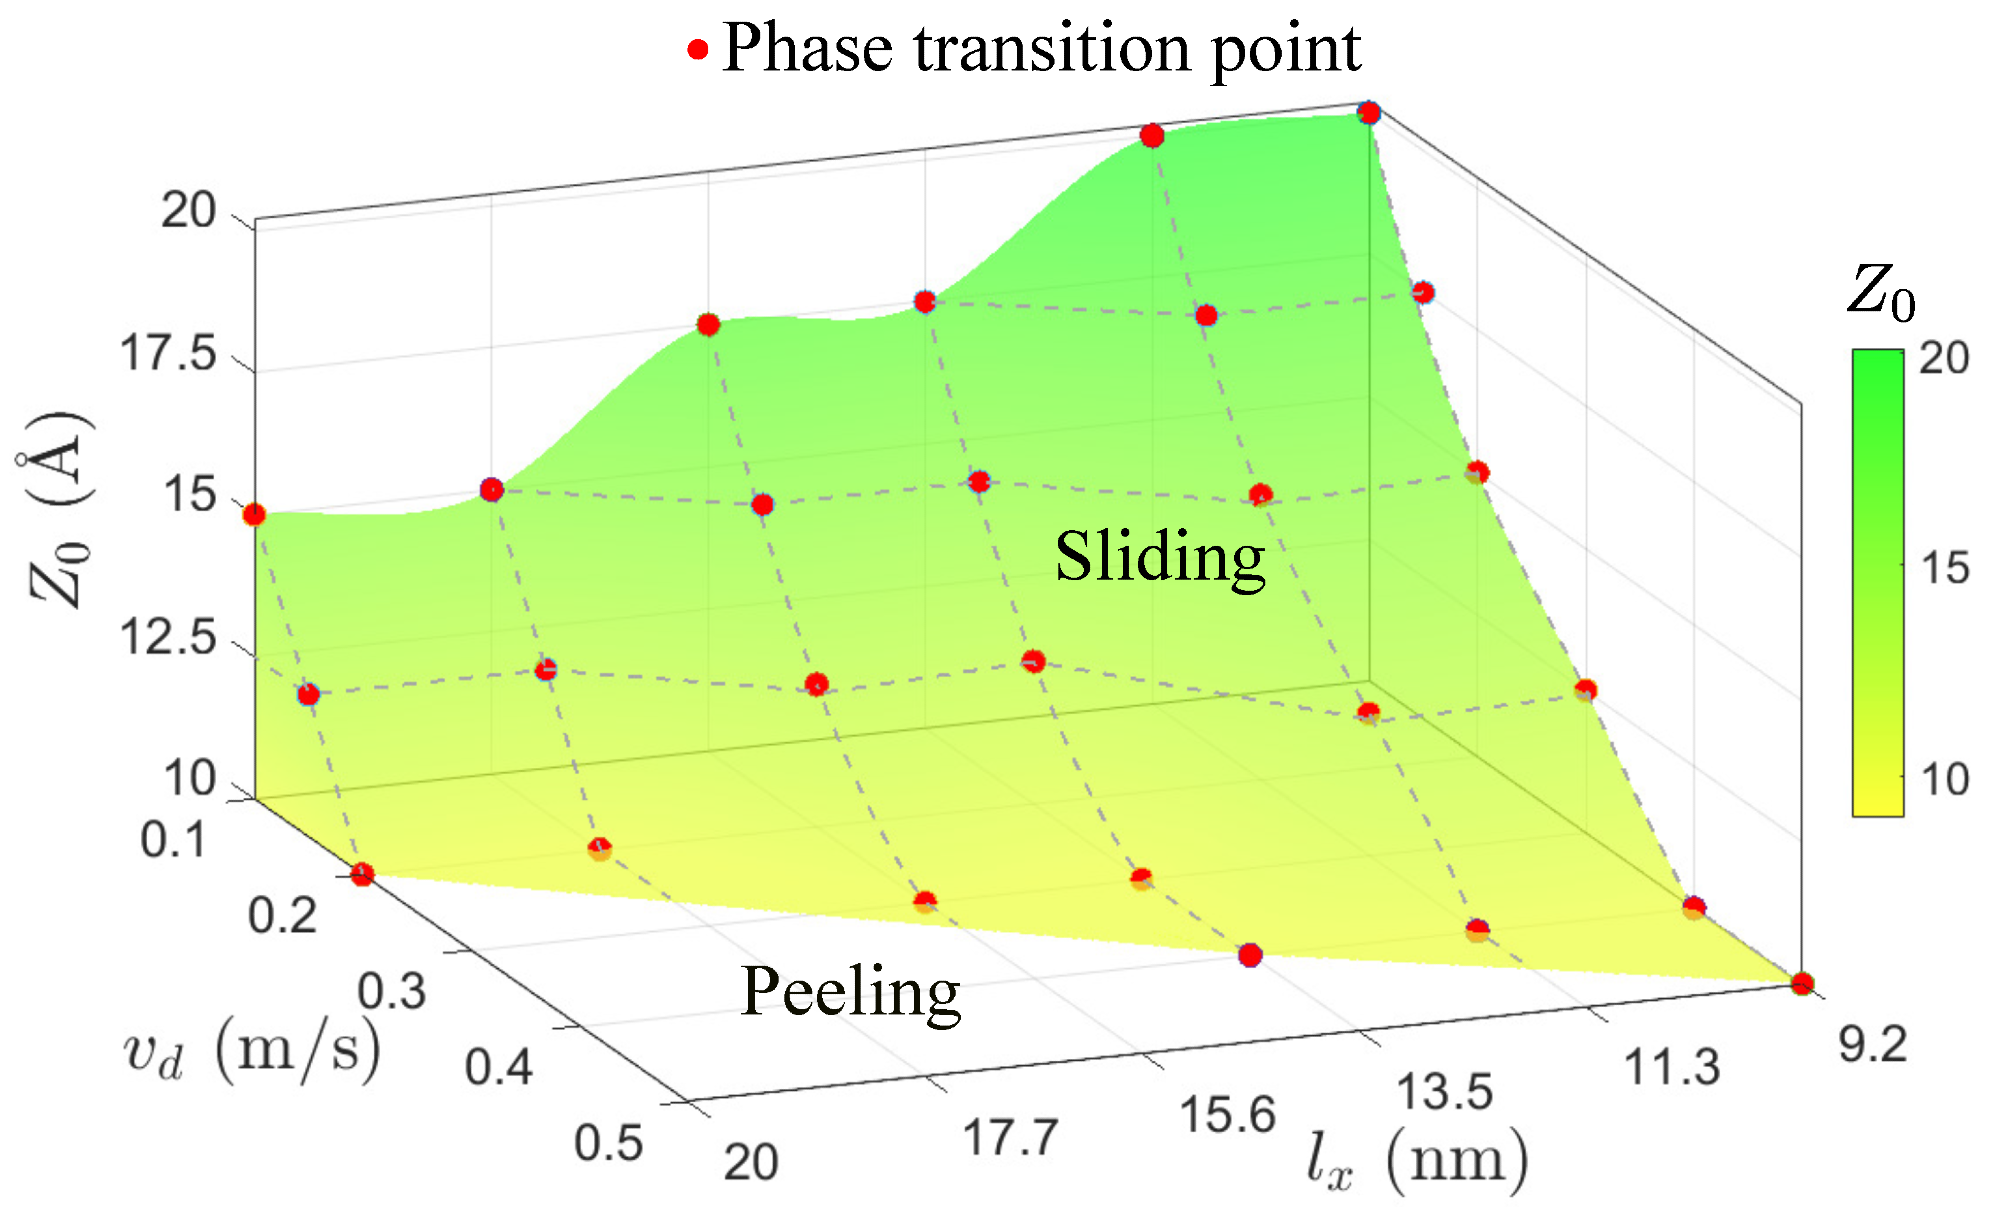 Phase diagram of sliding and peeling responses. With the rise of lx and vd, peeling behavior becomes energetically favorable.